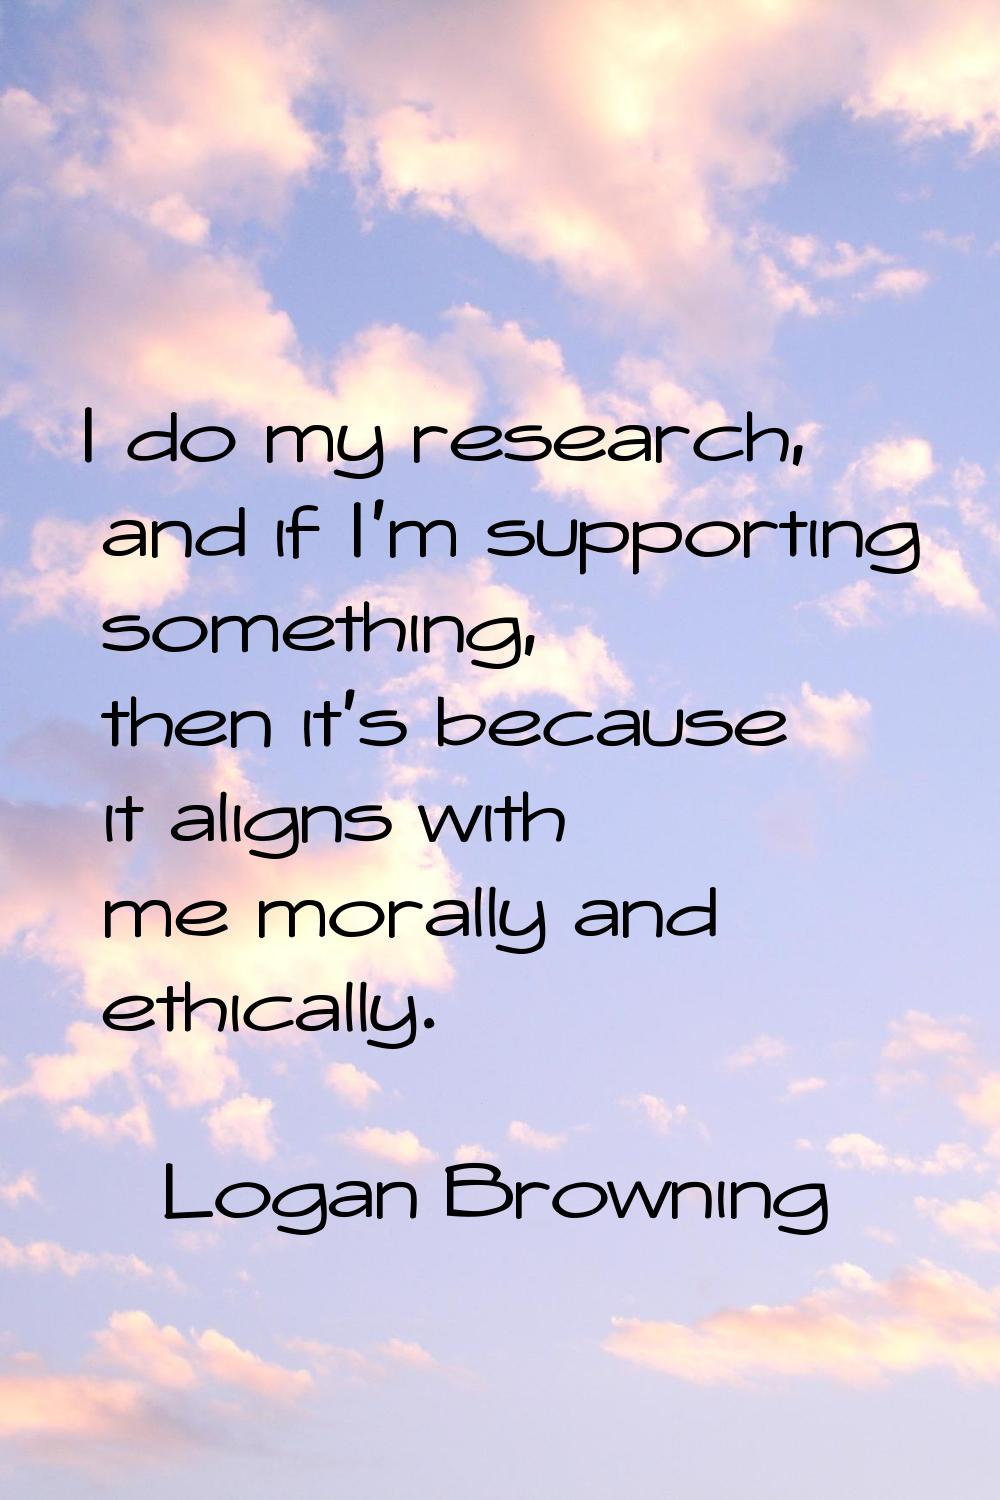 I do my research, and if I'm supporting something, then it's because it aligns with me morally and 